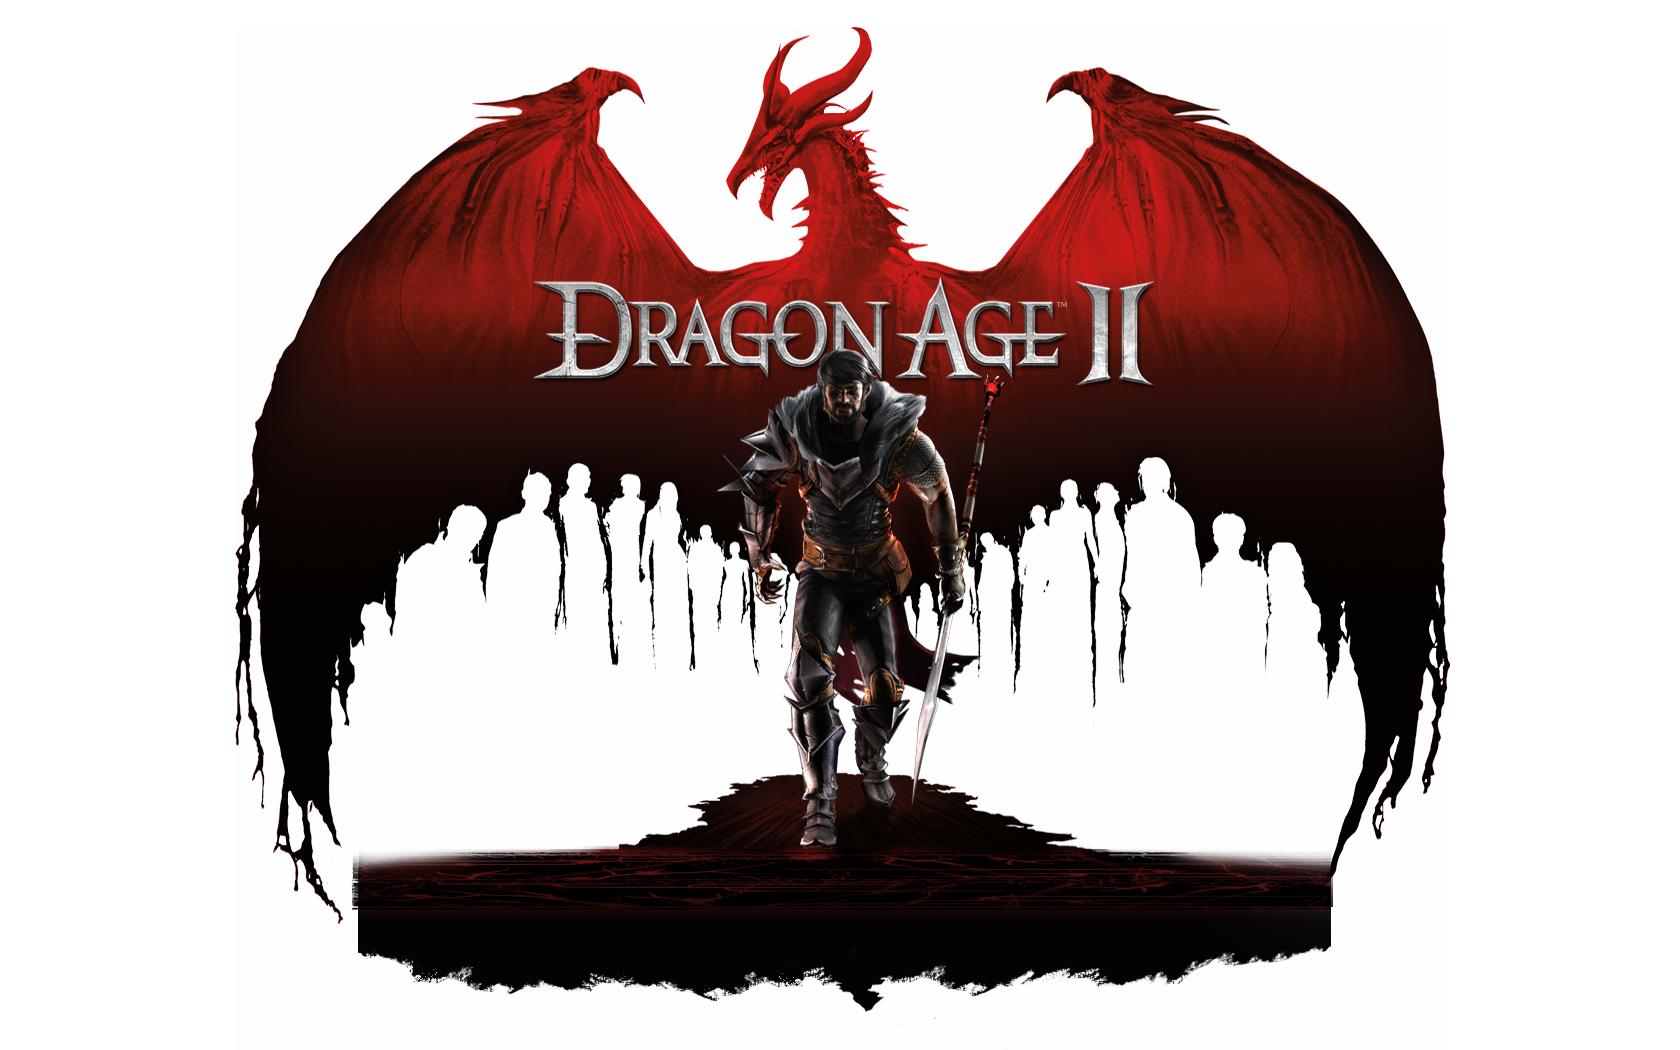 To download the Dragon Age 2 wallpaper click on the images below or